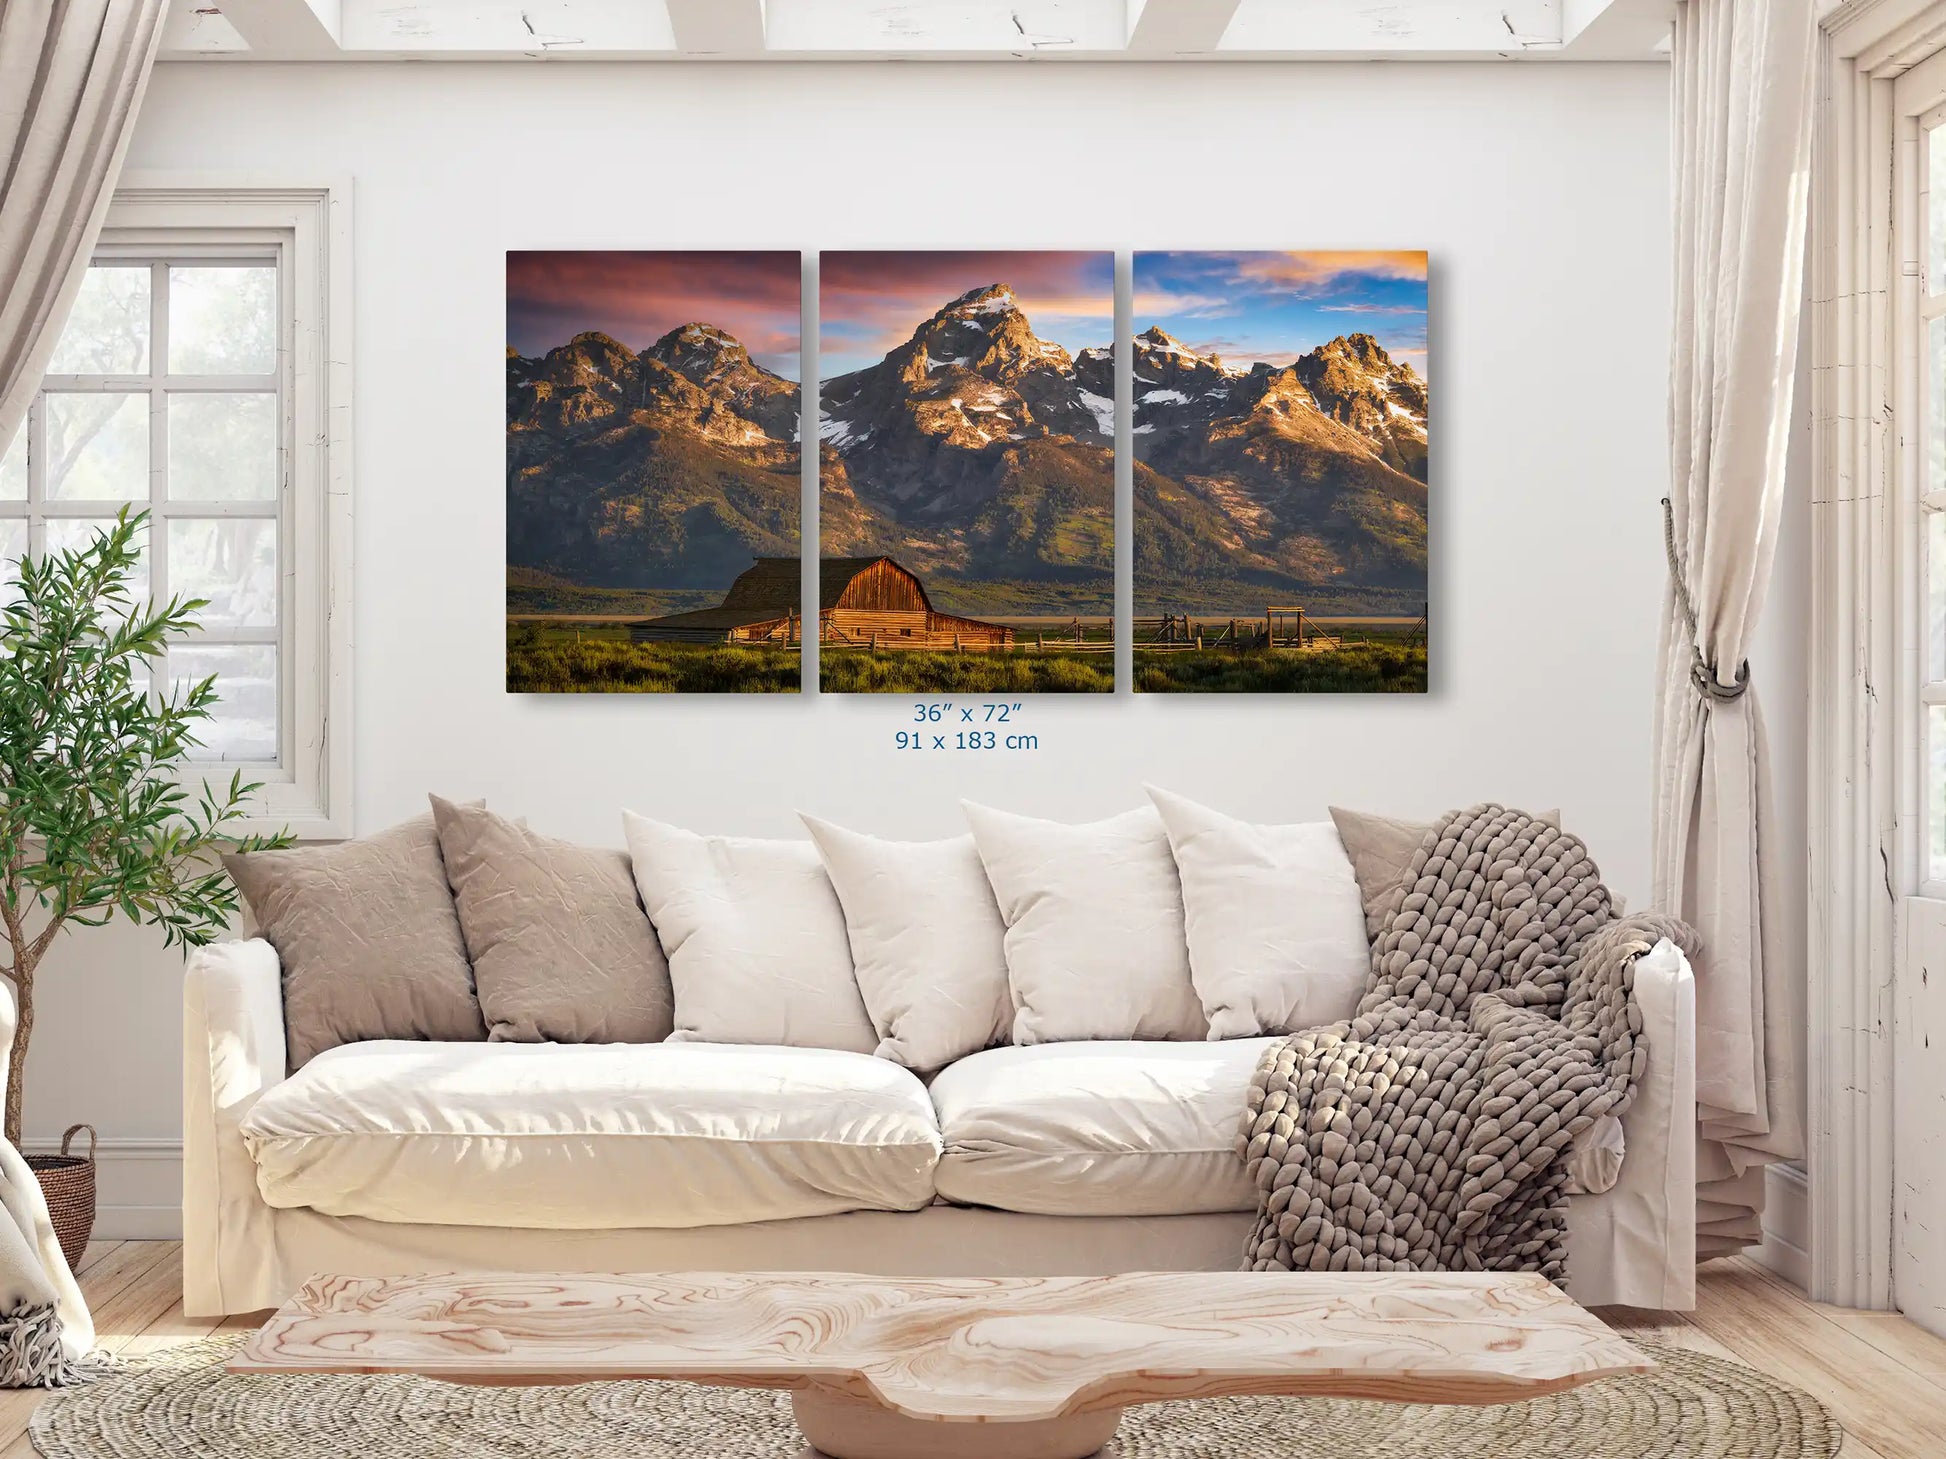 A three-piece canvas in 36x72-inches set over a couch, each showing a section of the John Moulton Homestead and Teton Mountains at sunrise, together creating a panoramic effect.